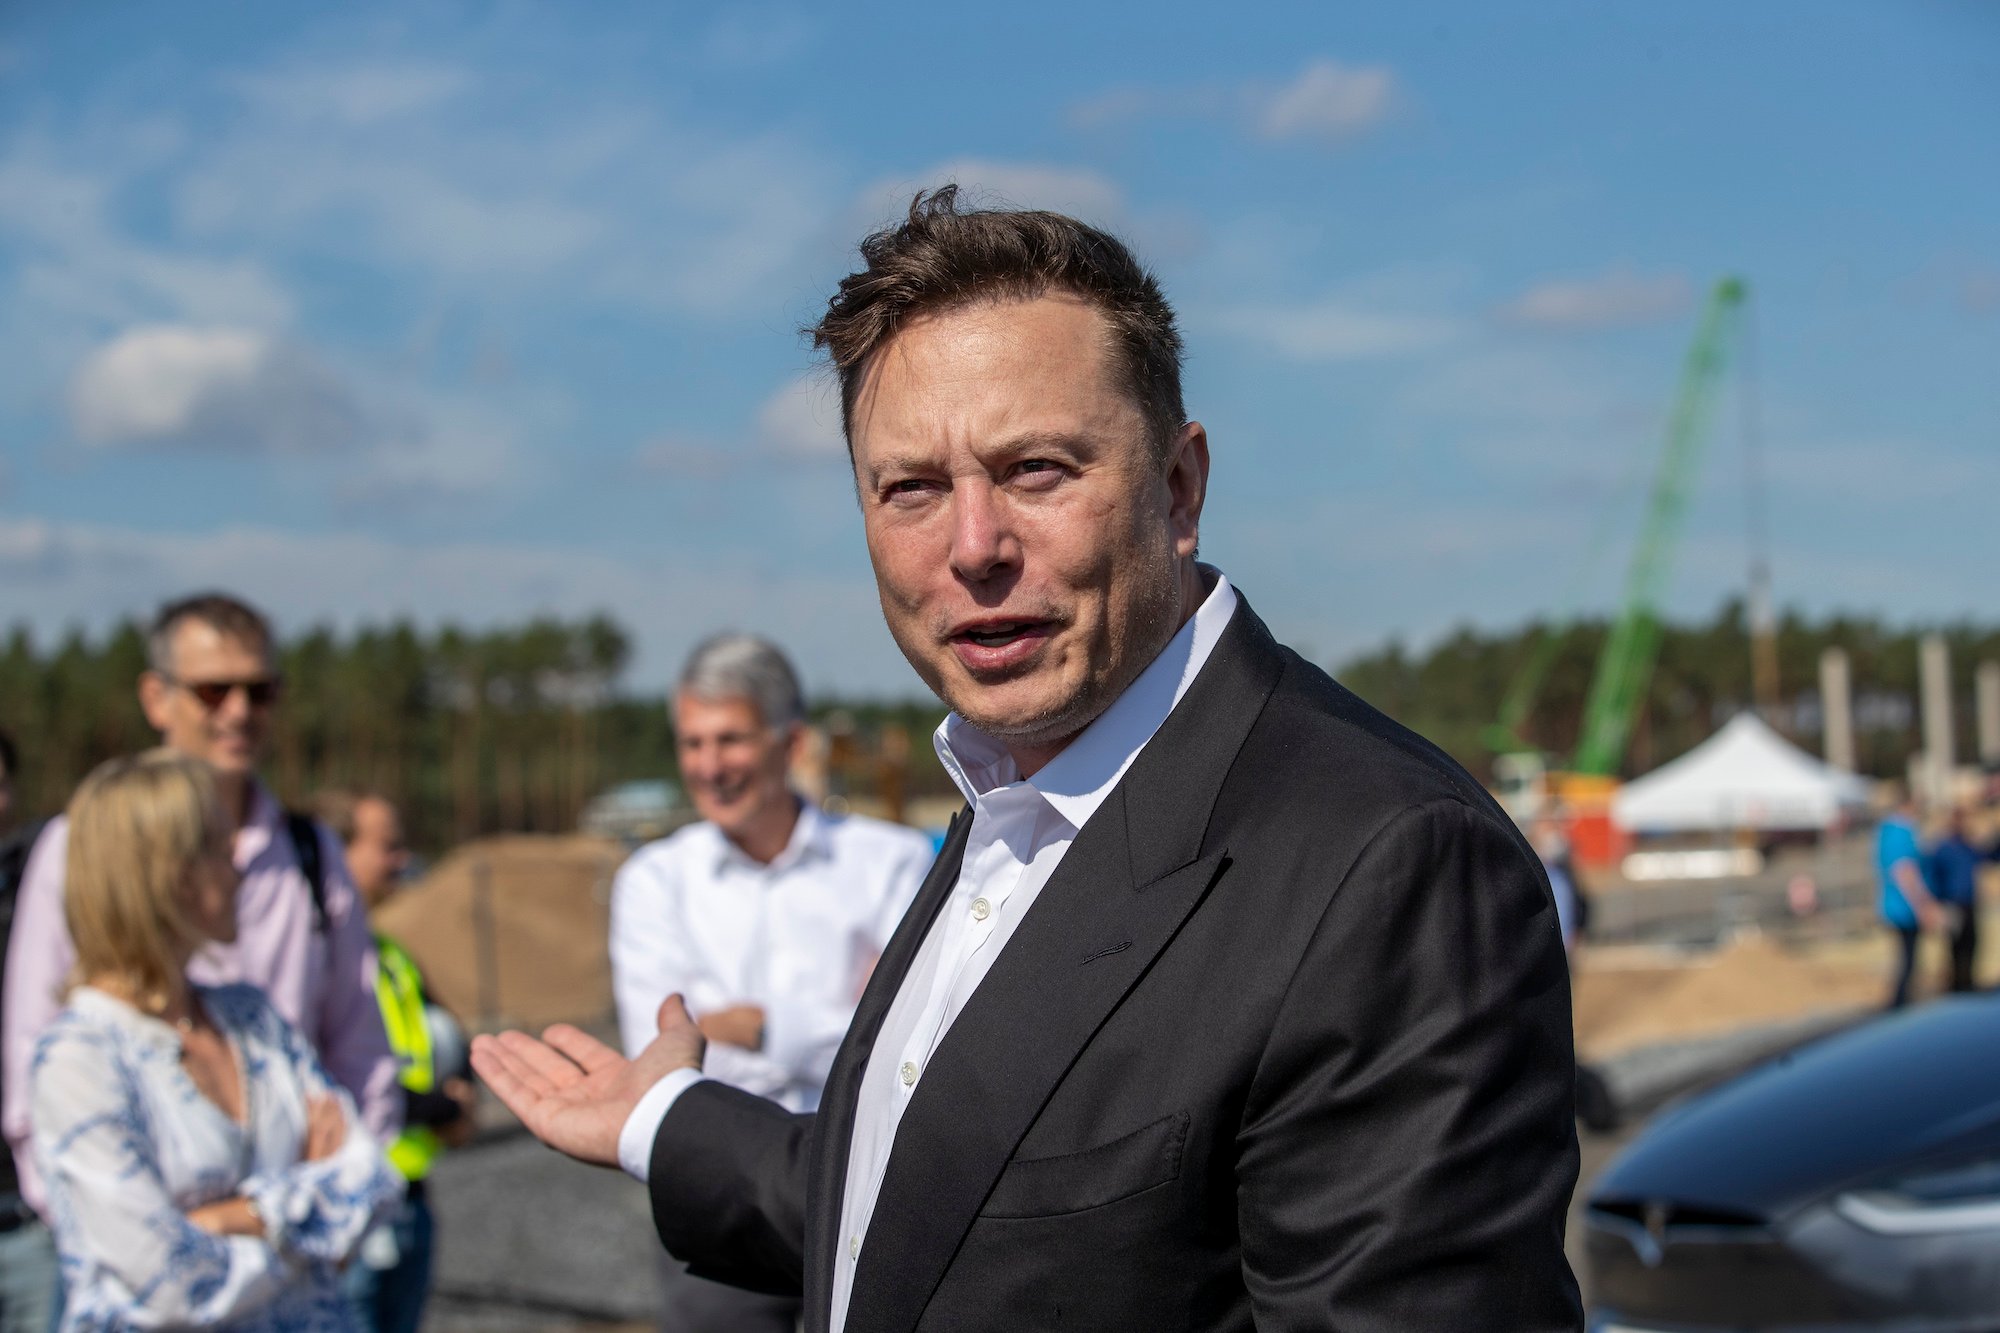 Elon Musk smiling, gesturing with his arm extendedbehind him